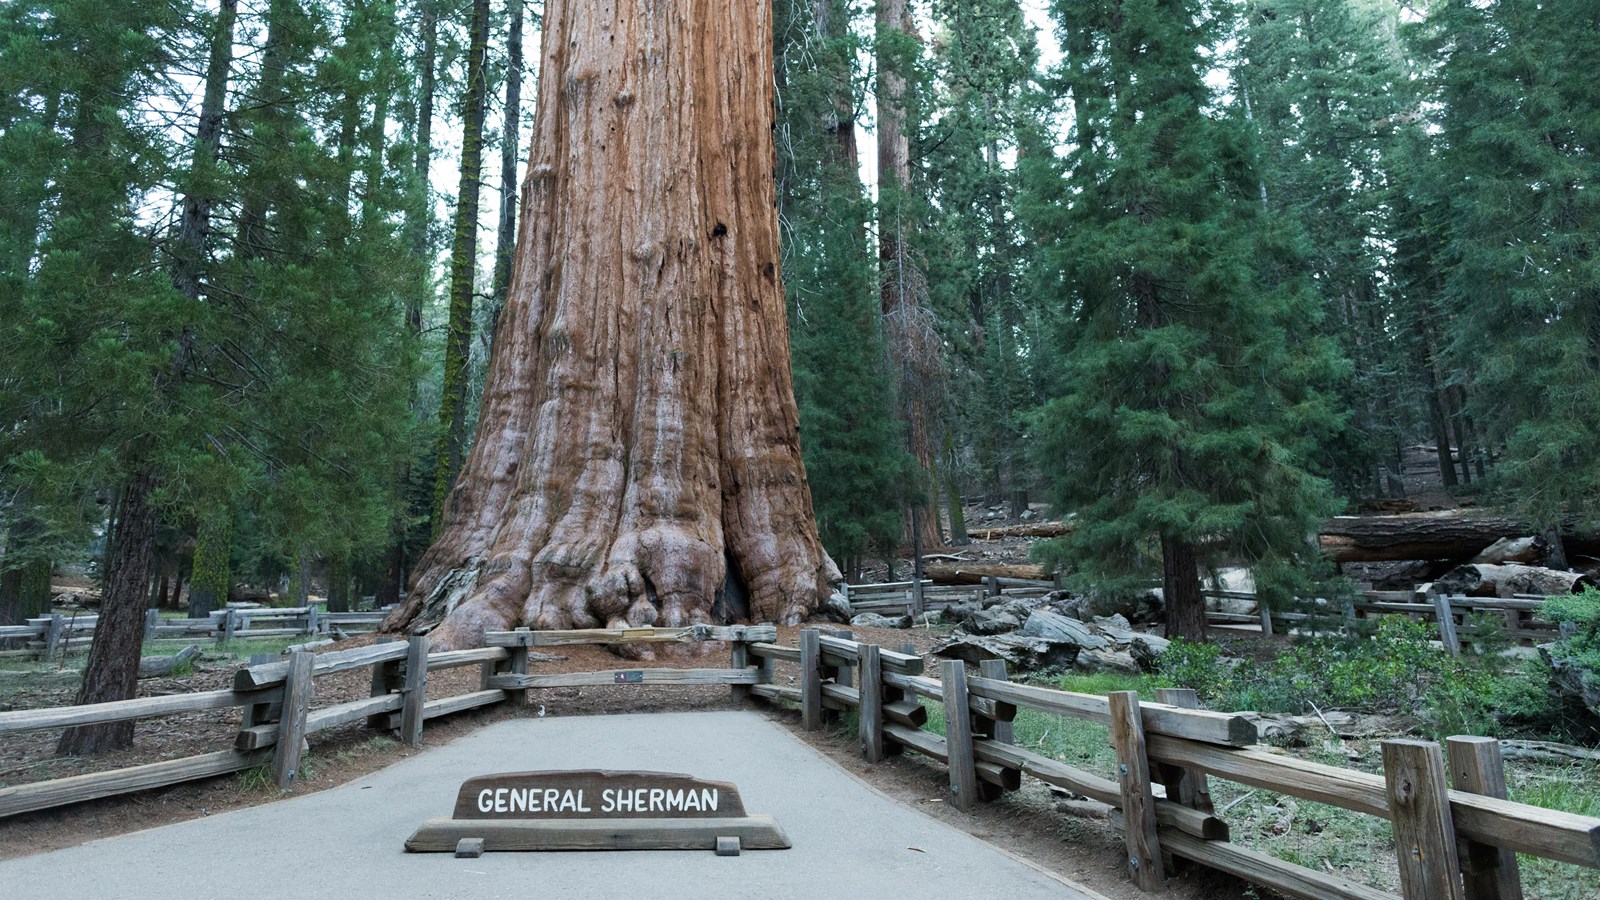 The largest tree in the world stands behind a wooden fence